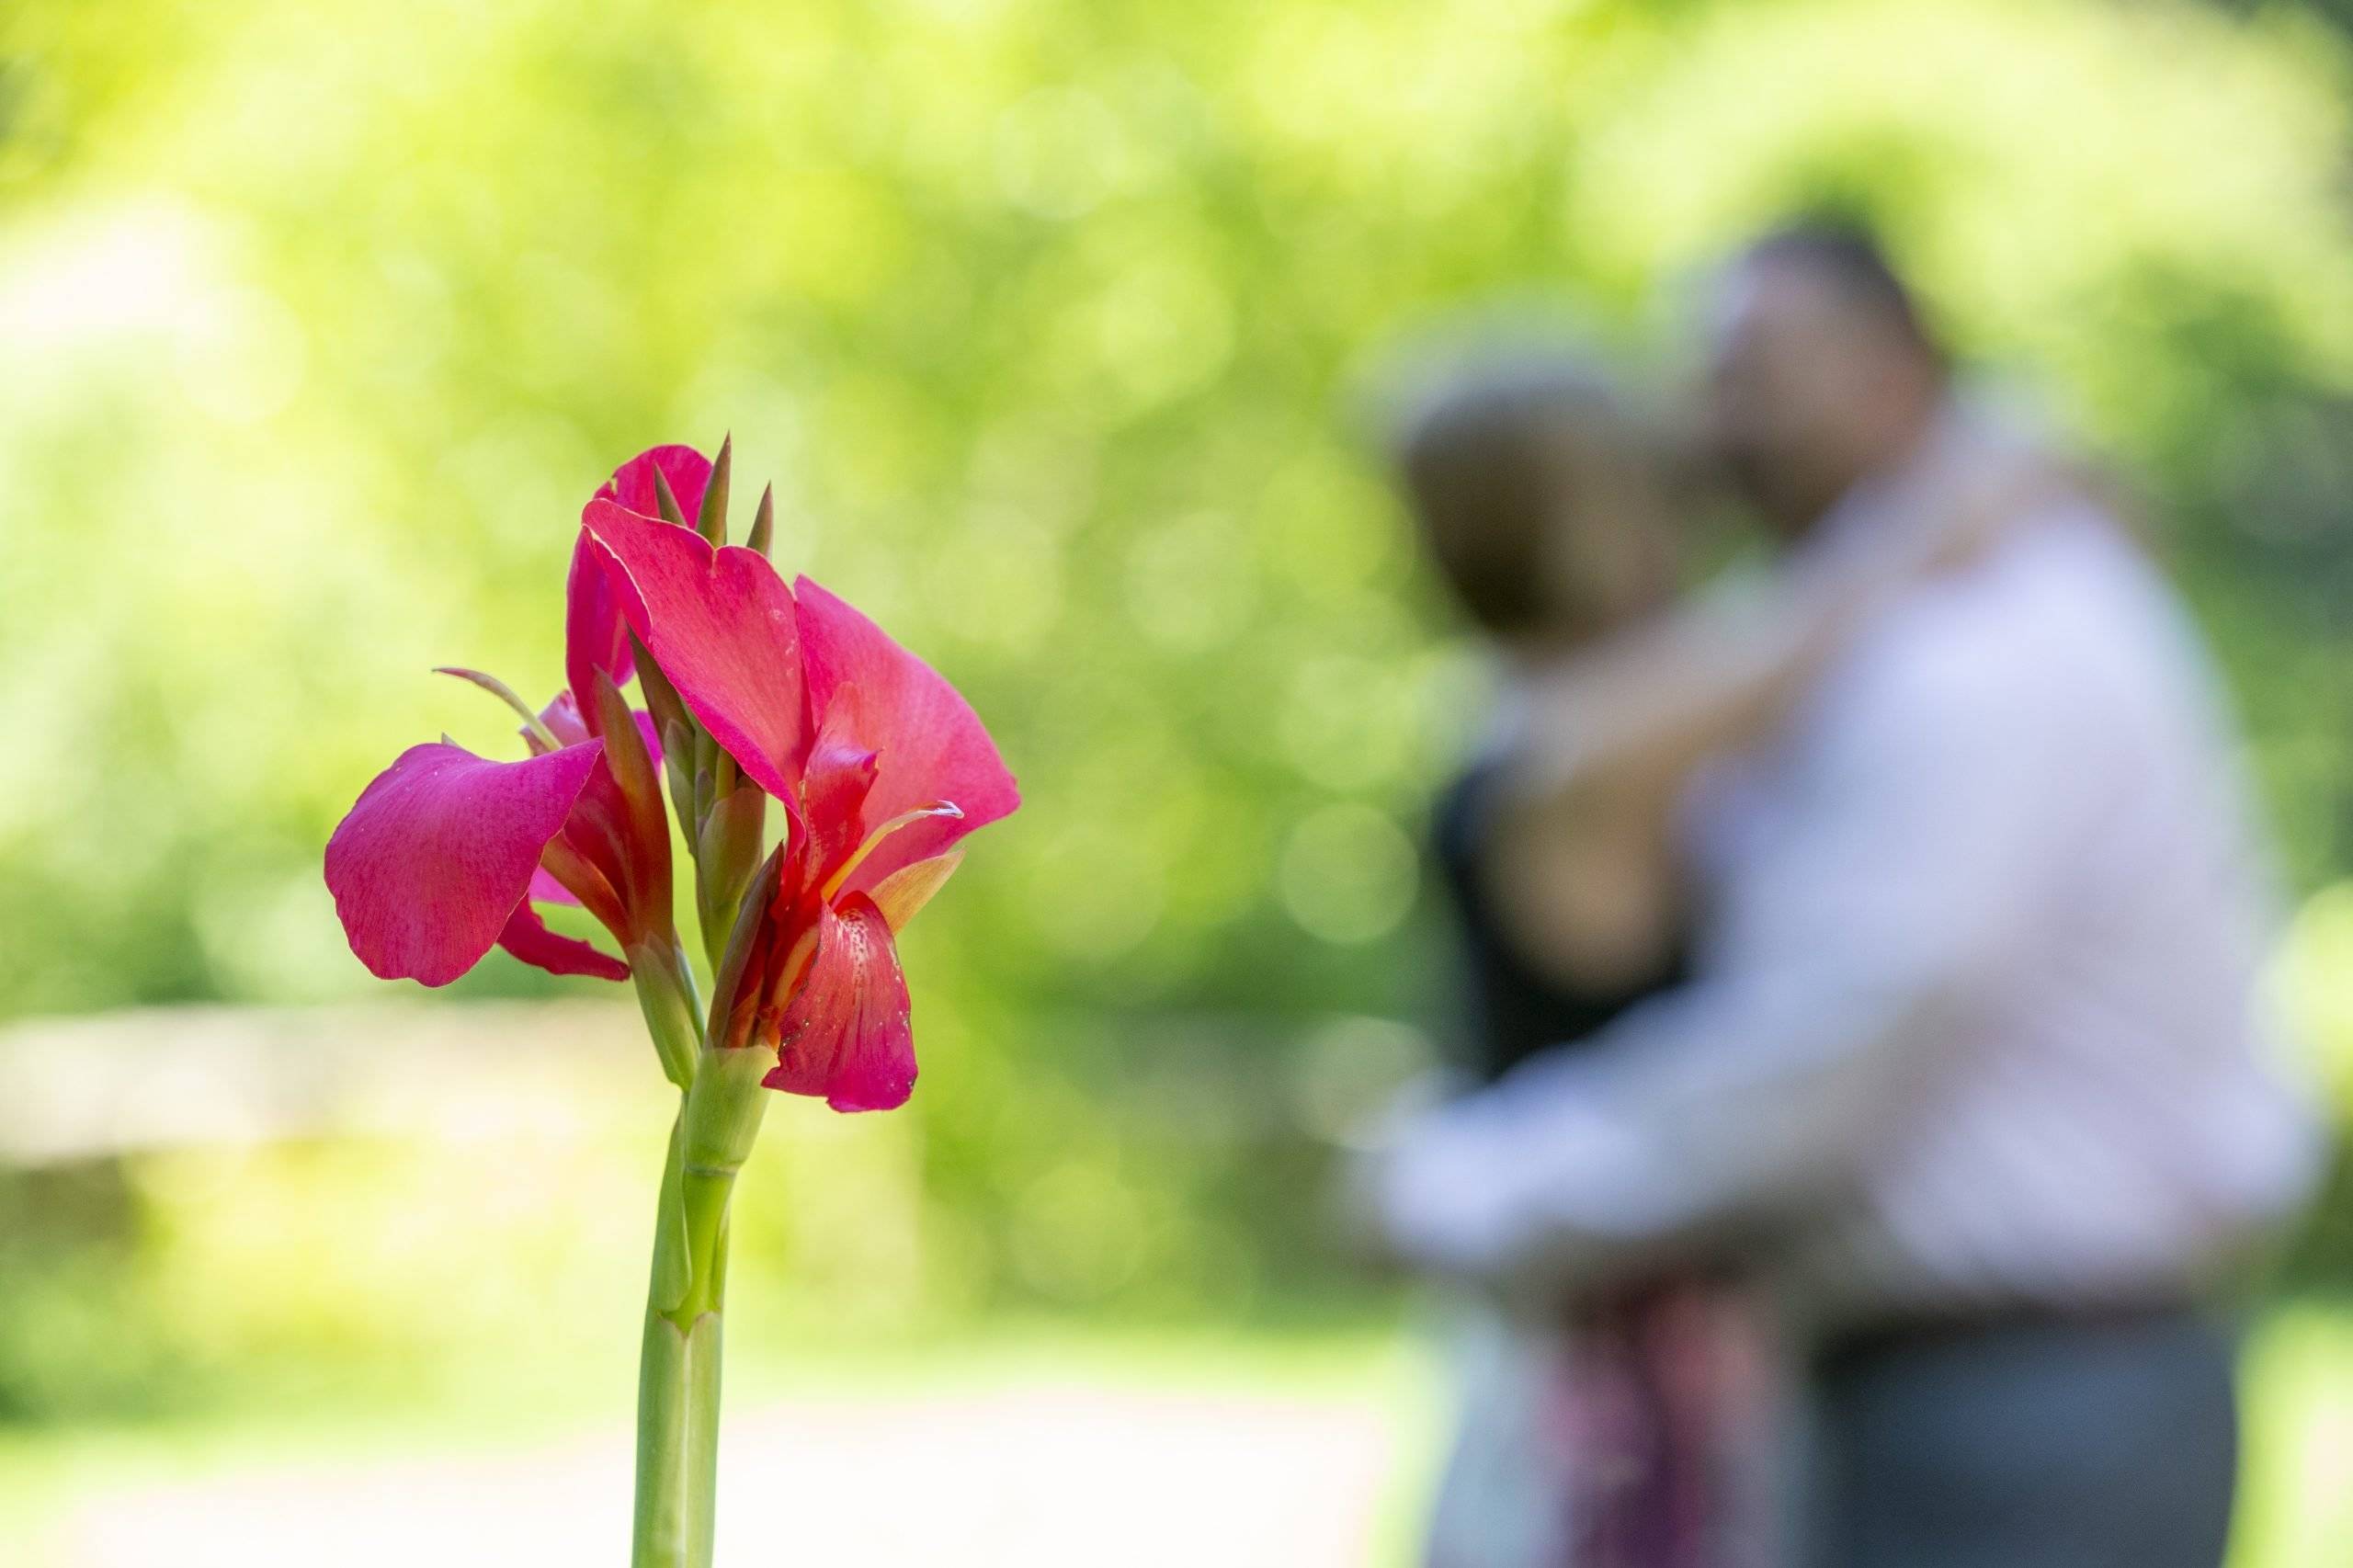 A man and woman are embracing in front of a flower.